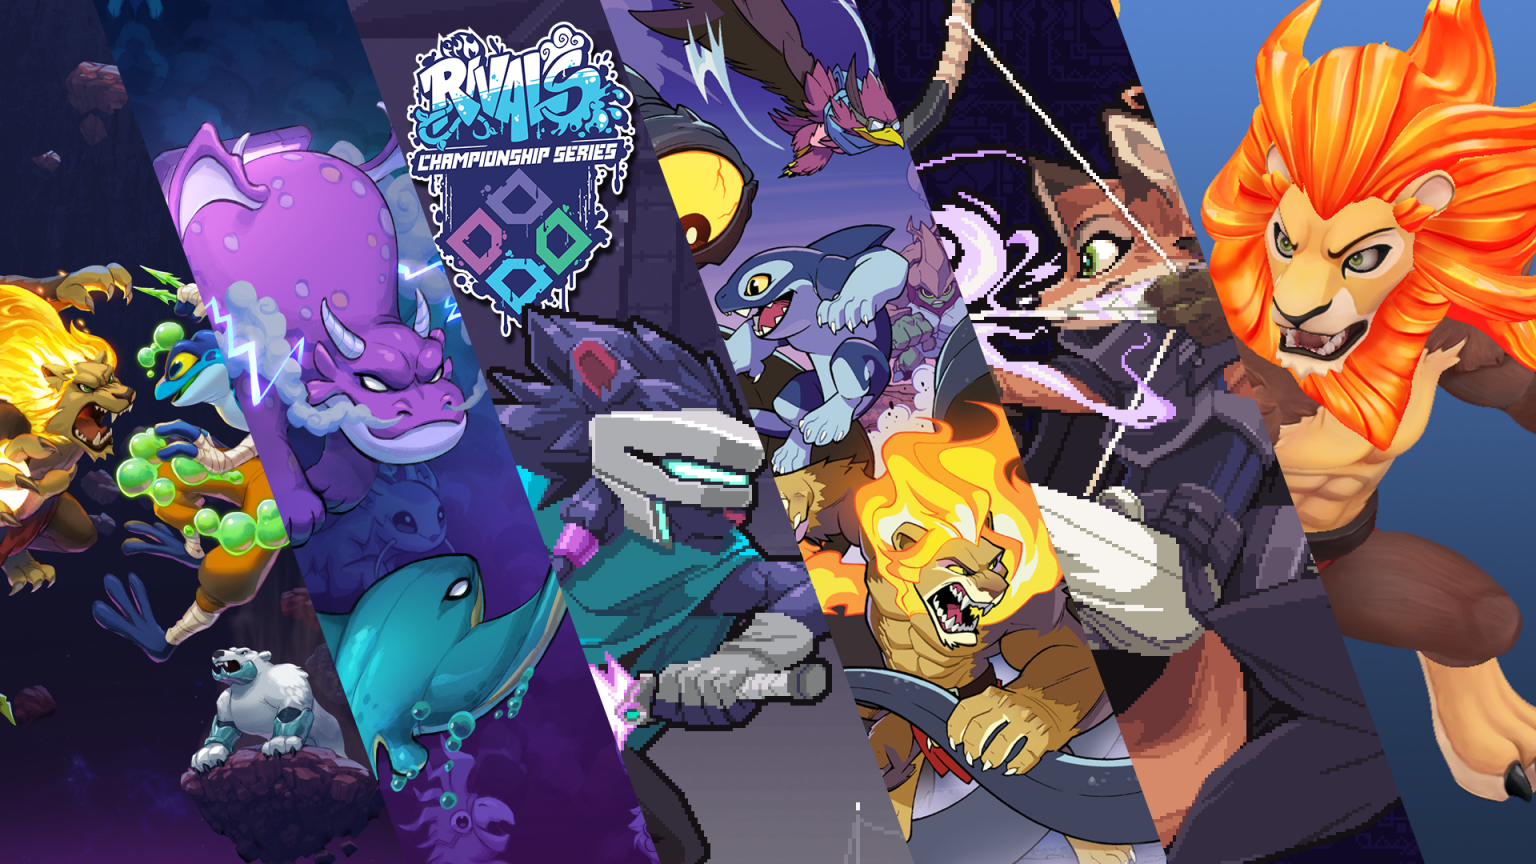 rivals of aether